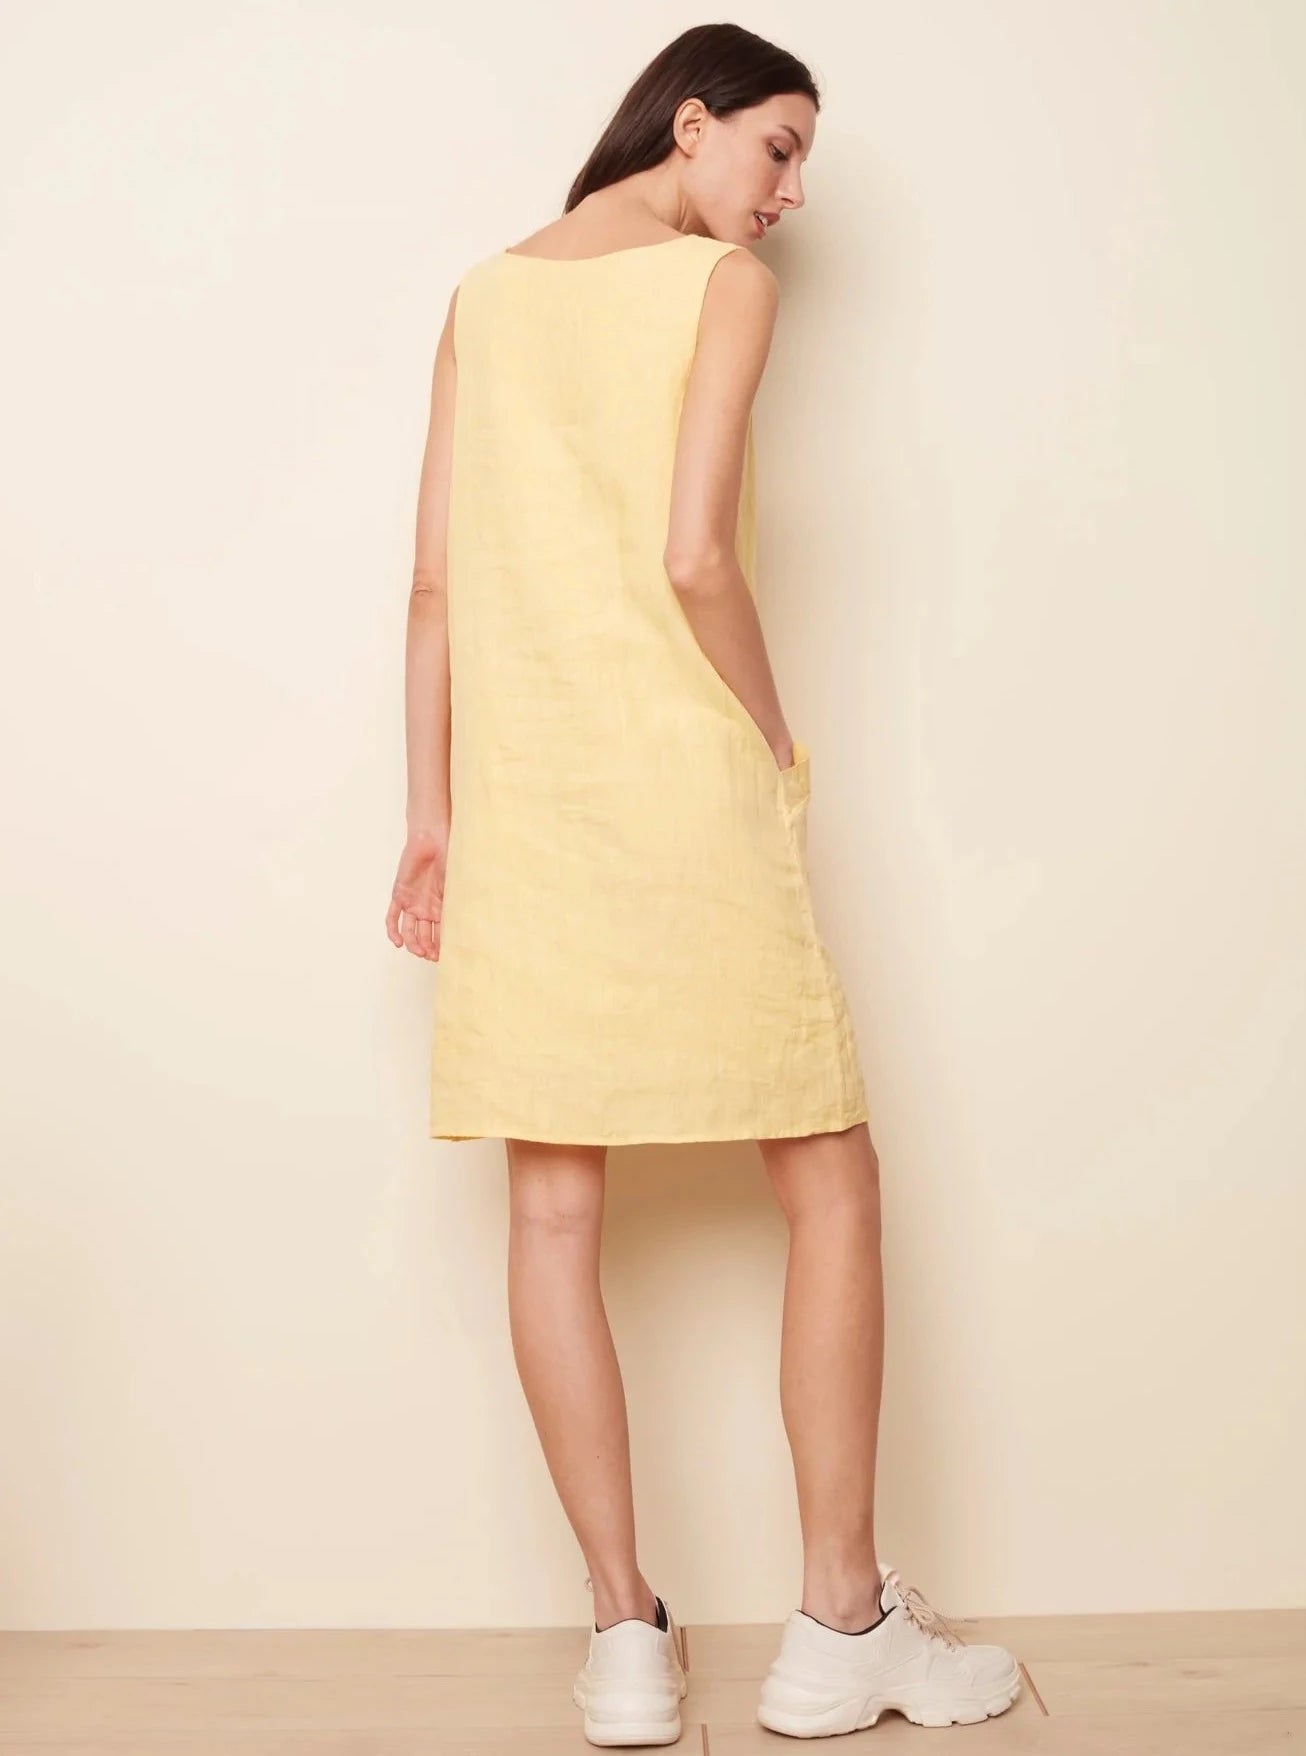 Sleeveless Solid Dress With V-Neck and Pockets [Pineapple-C3115]